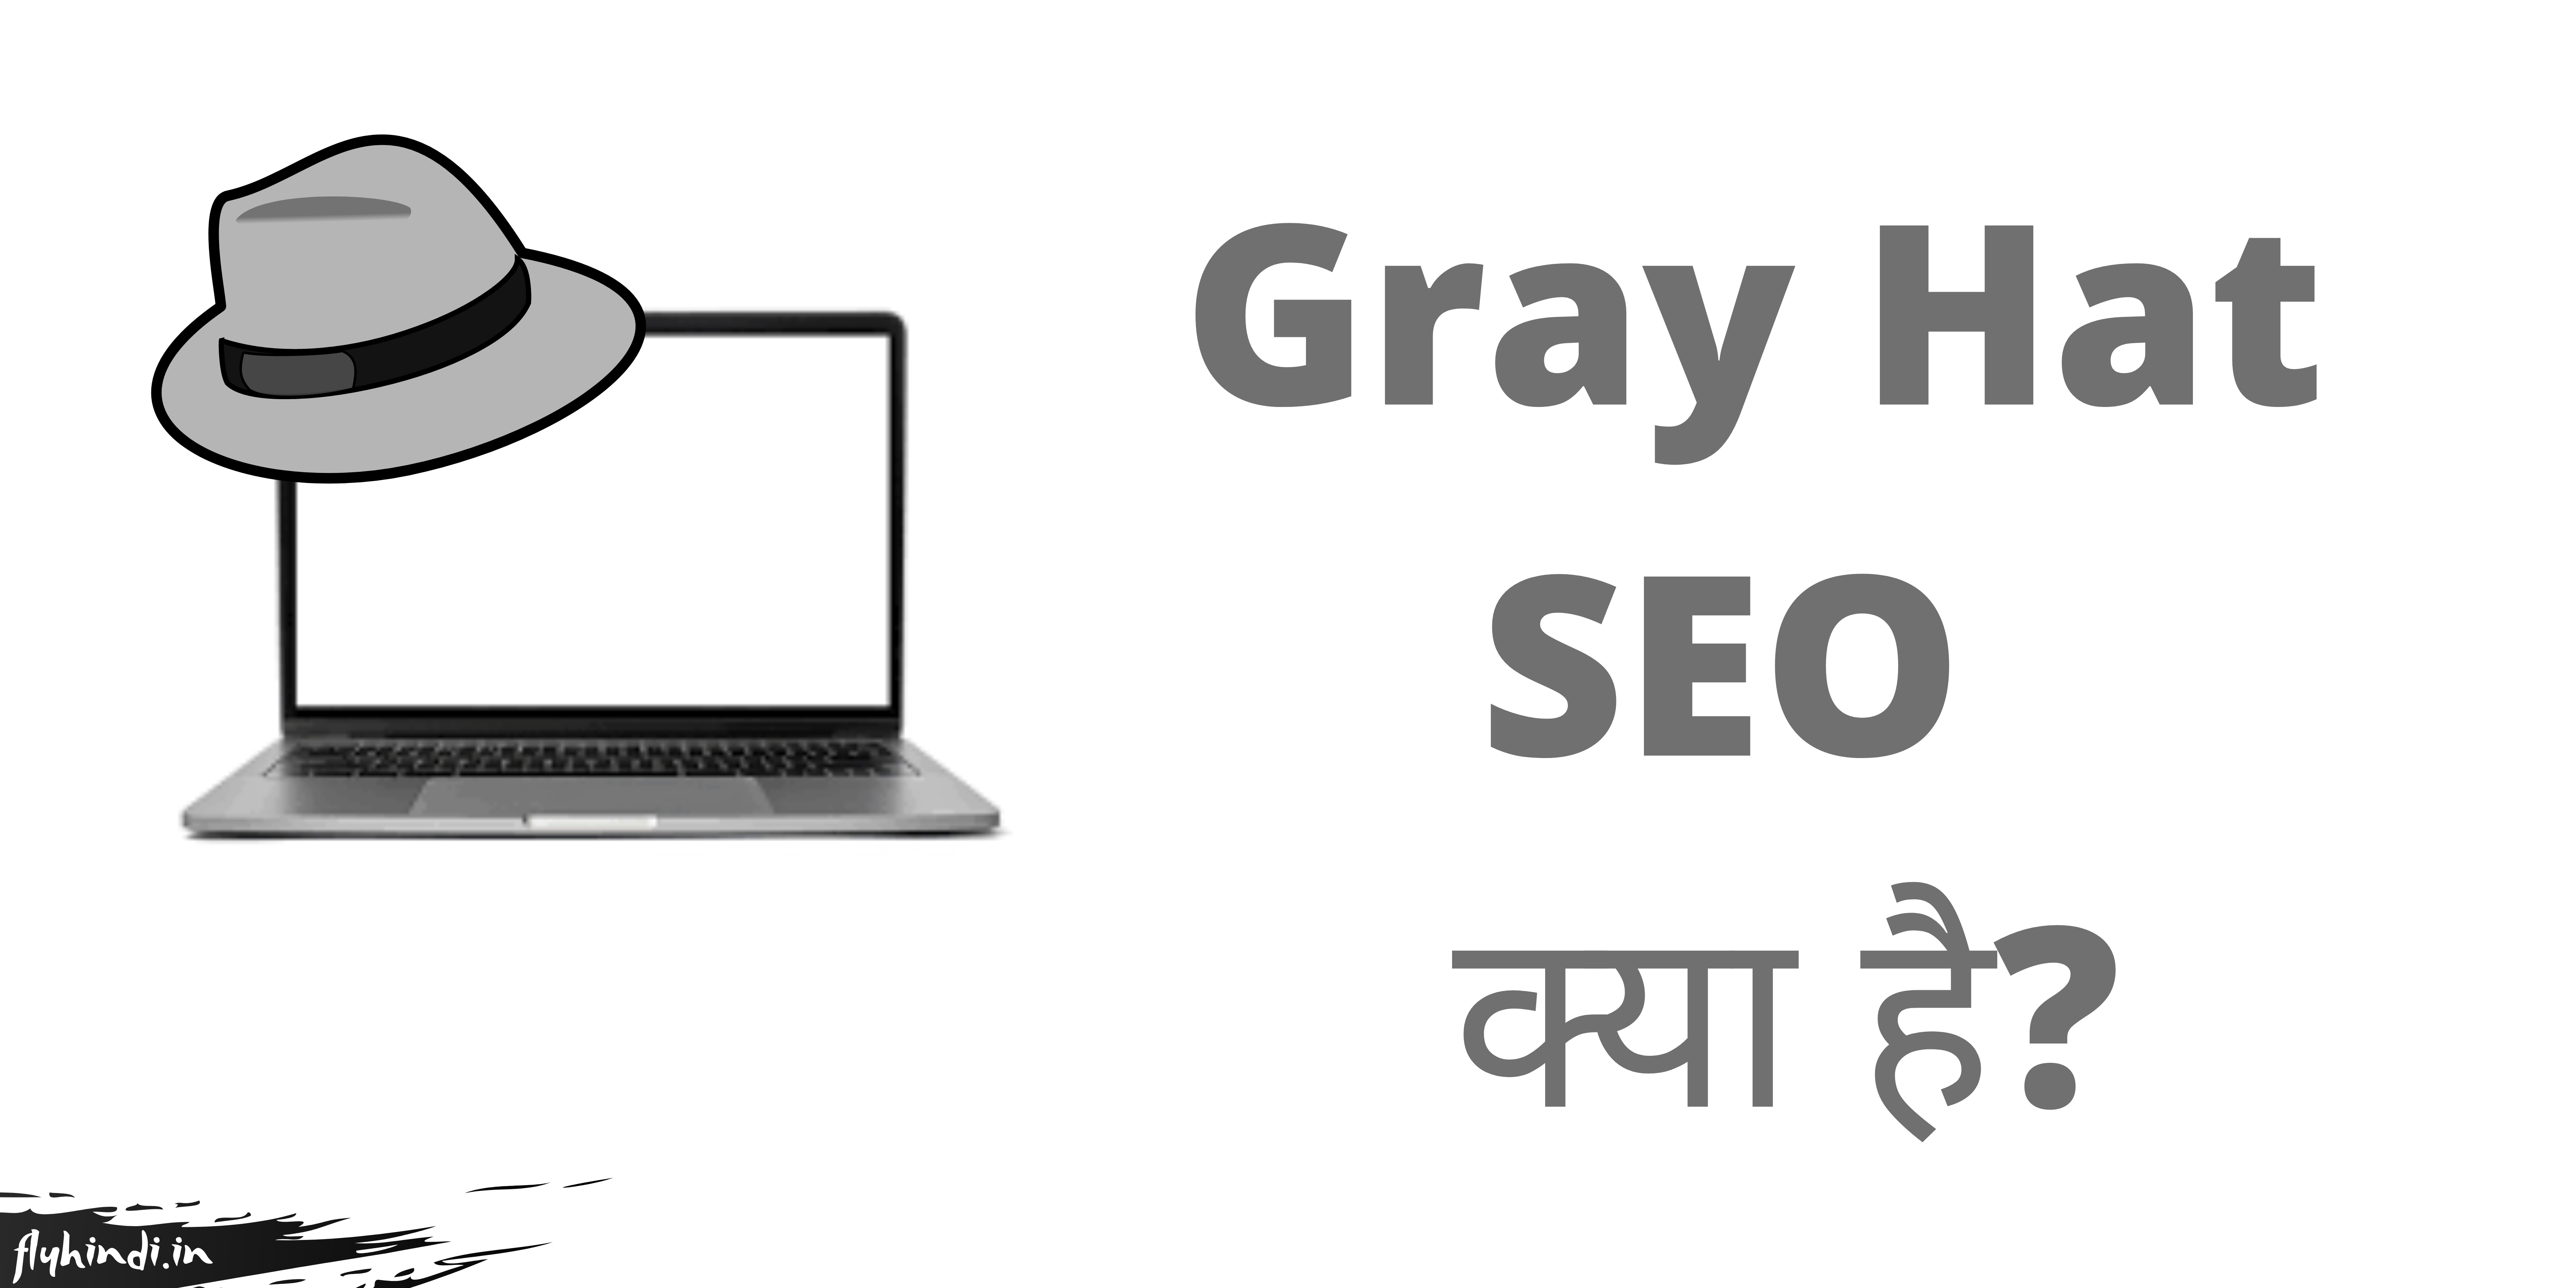 You are currently viewing Gray Hat SEO क्या है, Top 10 Gray Hat Seo Techniques in Hindi